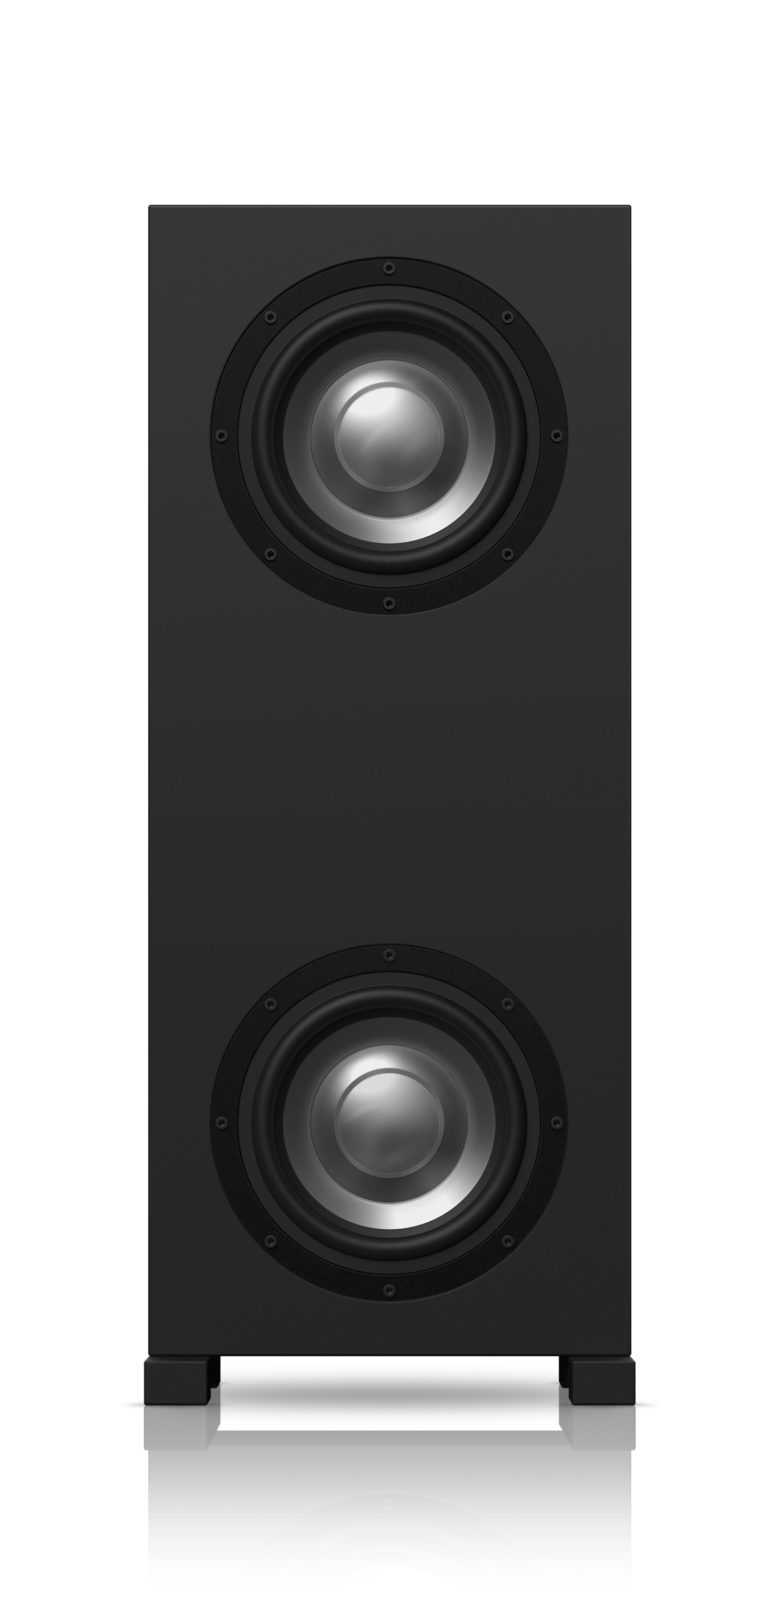 Amphion BaseTwo25 Right side